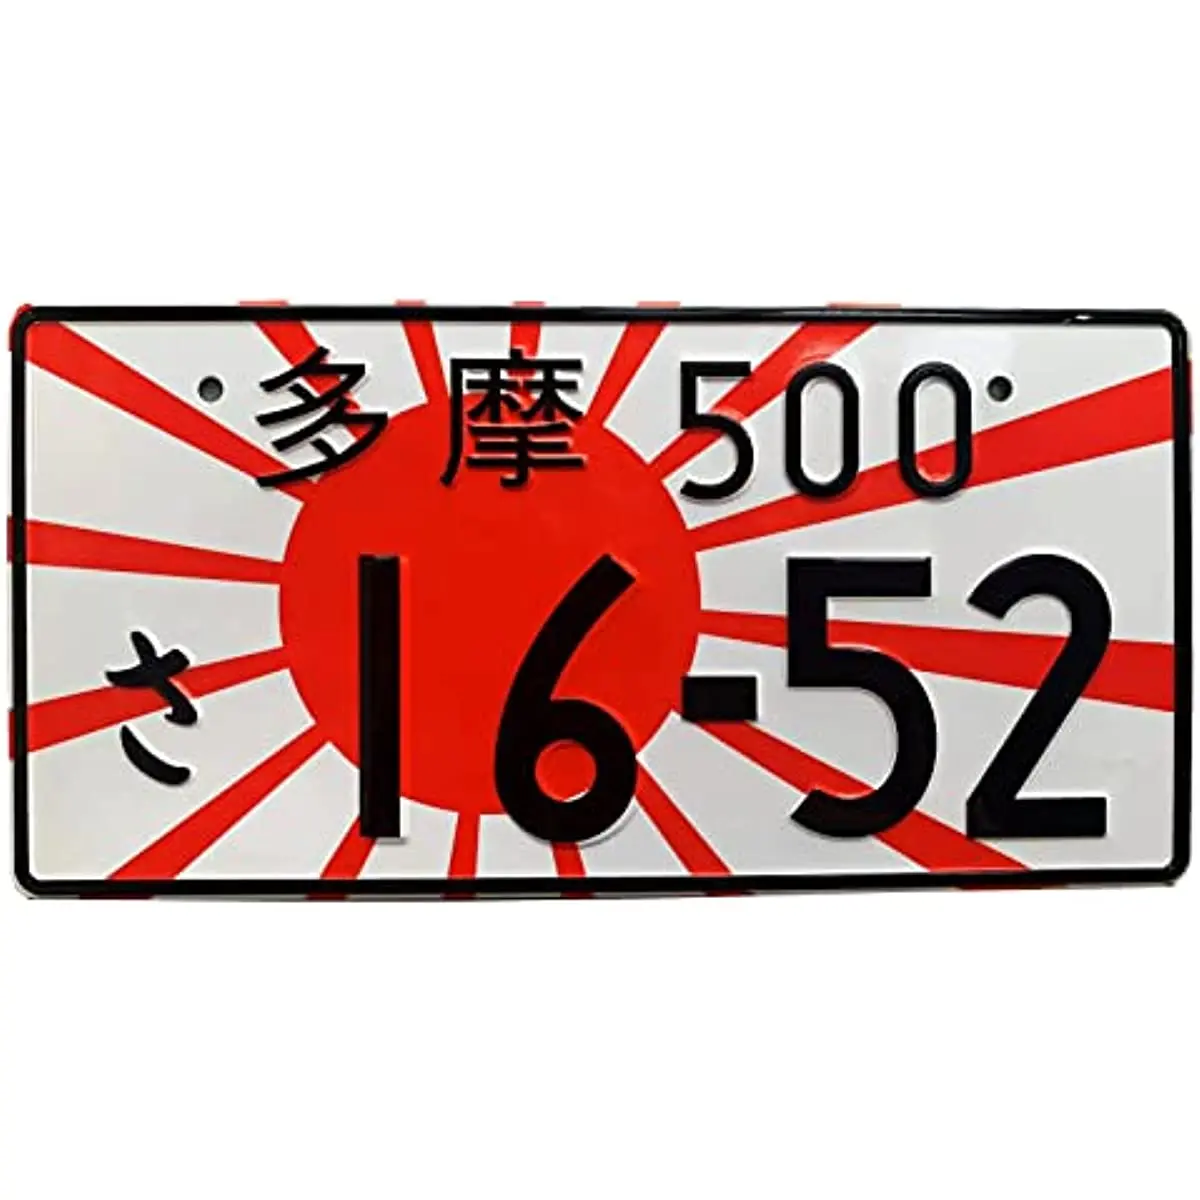 

Hot Universal Embossed Characters Numbers Japanese Auto Car License Plate Aluminum farmhouse decor wall decor room decor 1